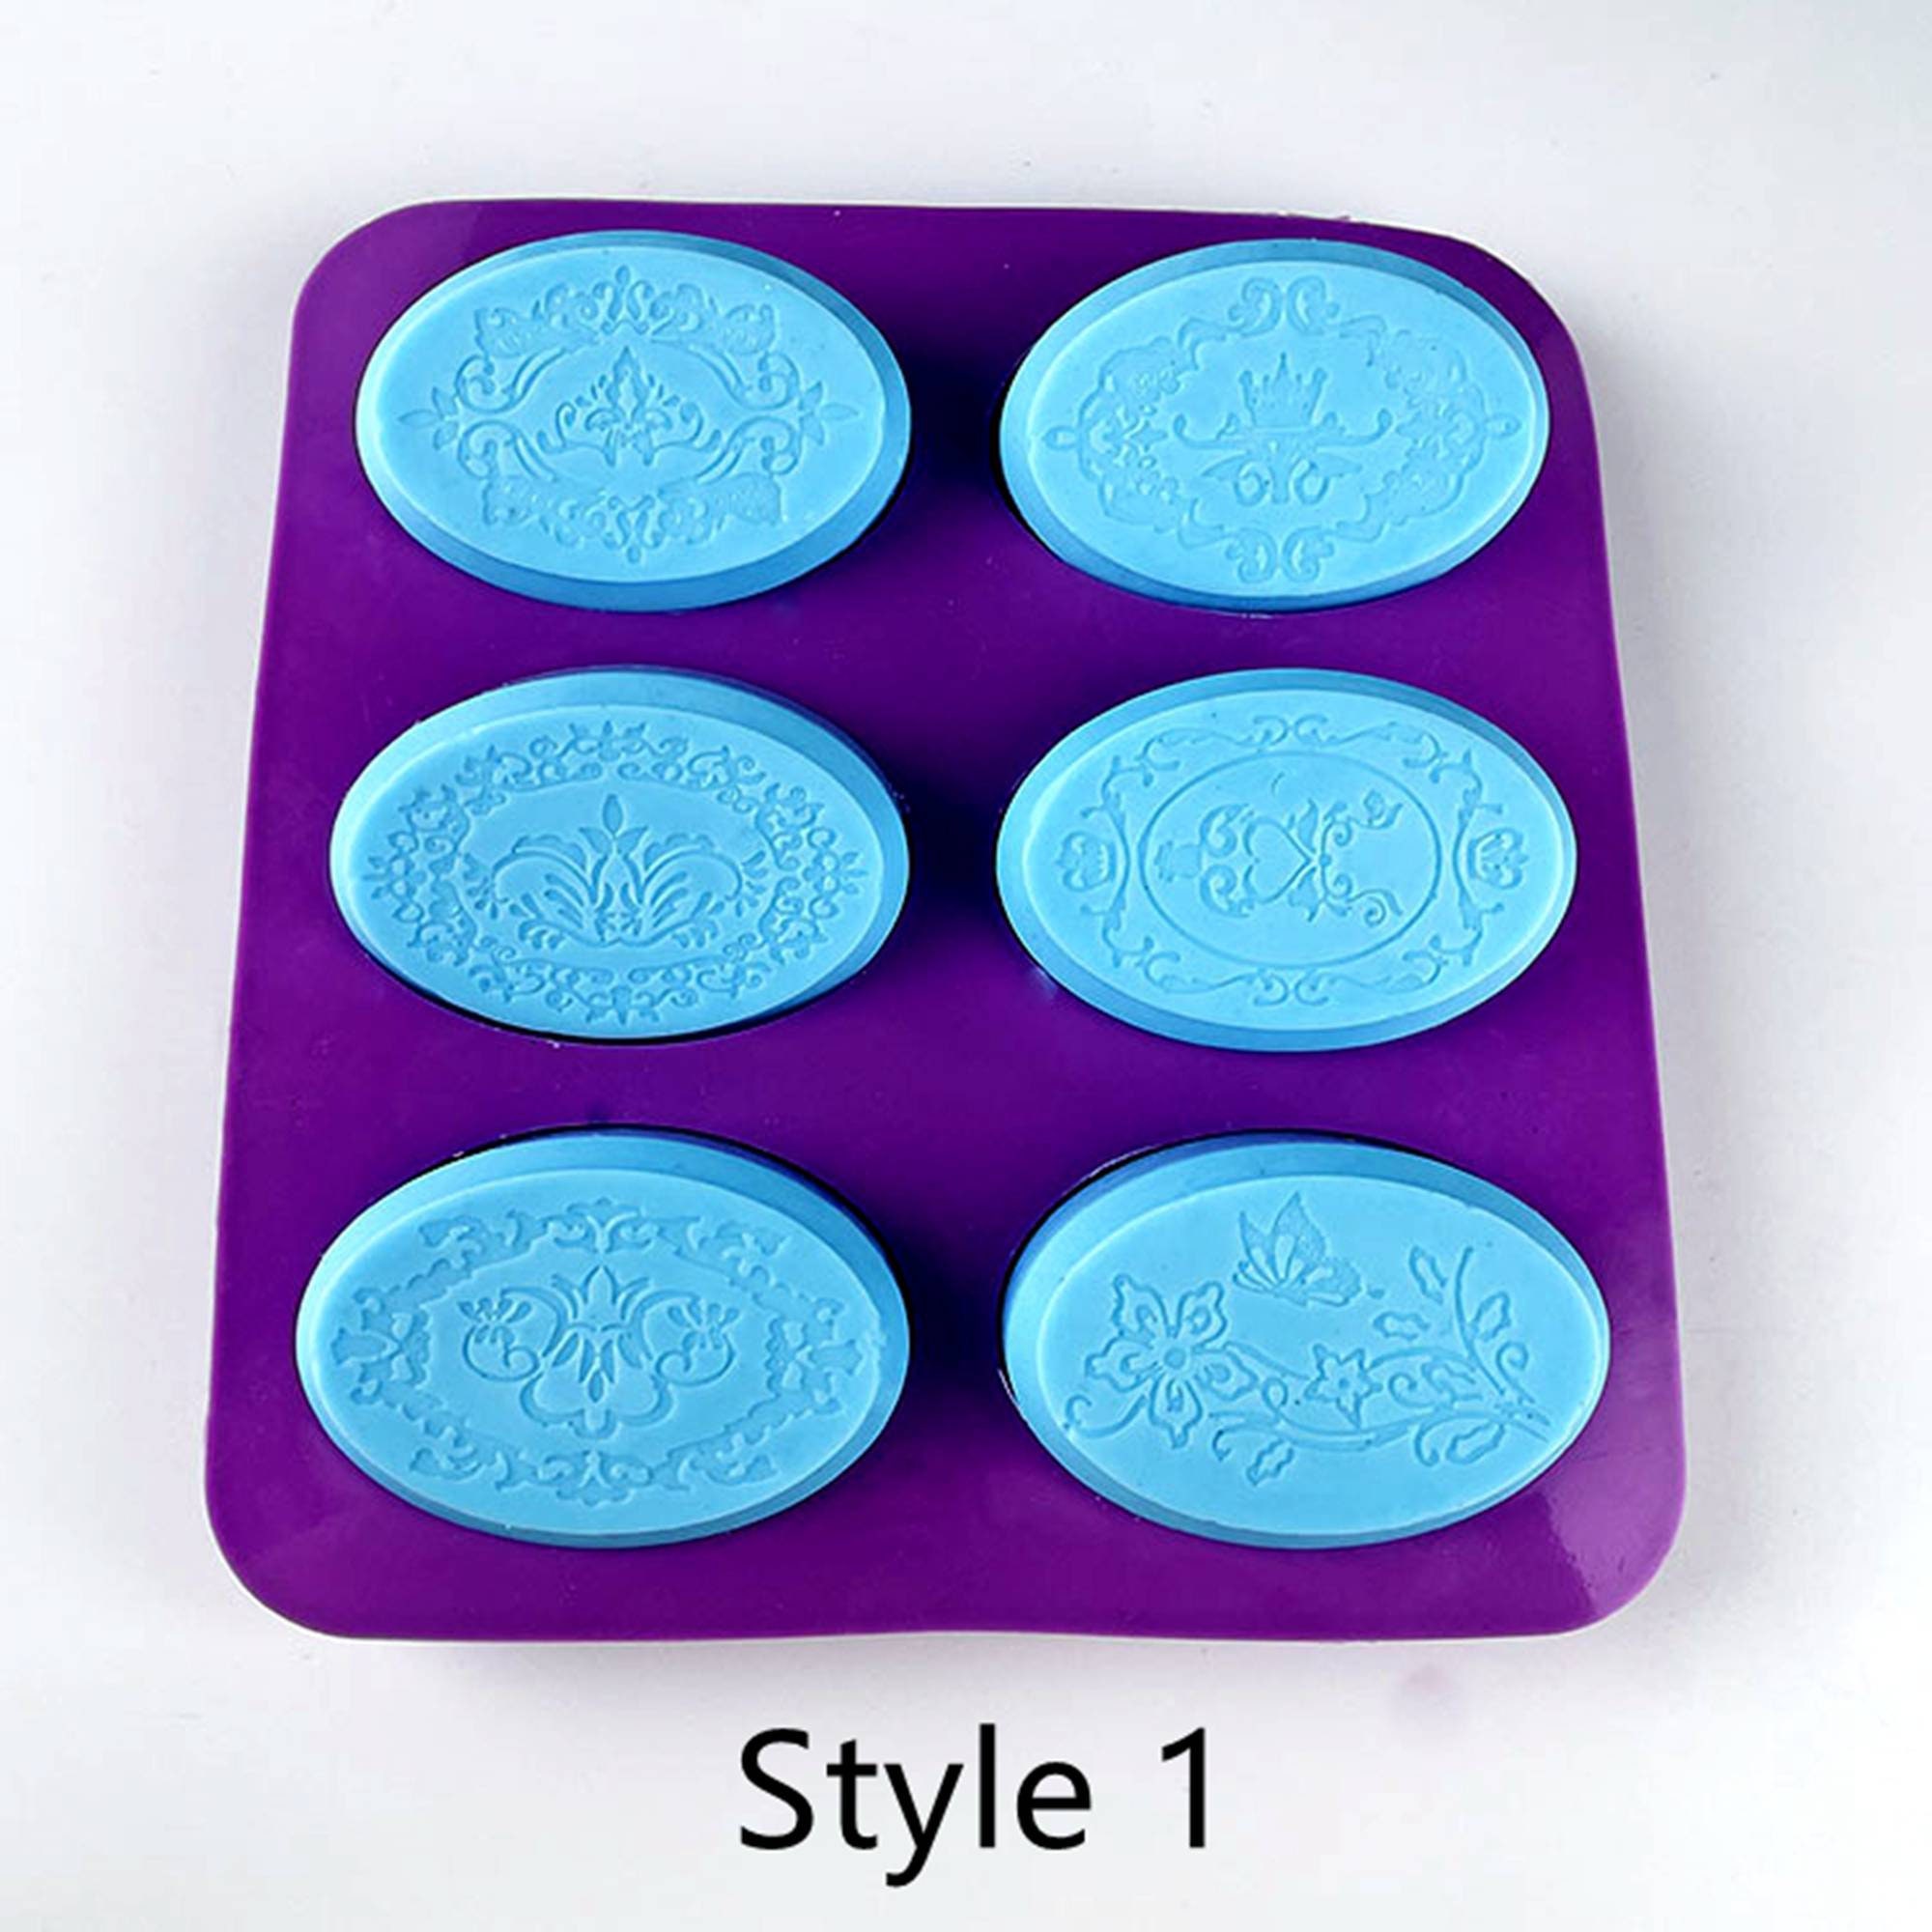 6 Cavities Silicone Soap Molds Oval Square Mould with Mixed Flower Patterns  DIY Handmade Craft Cake